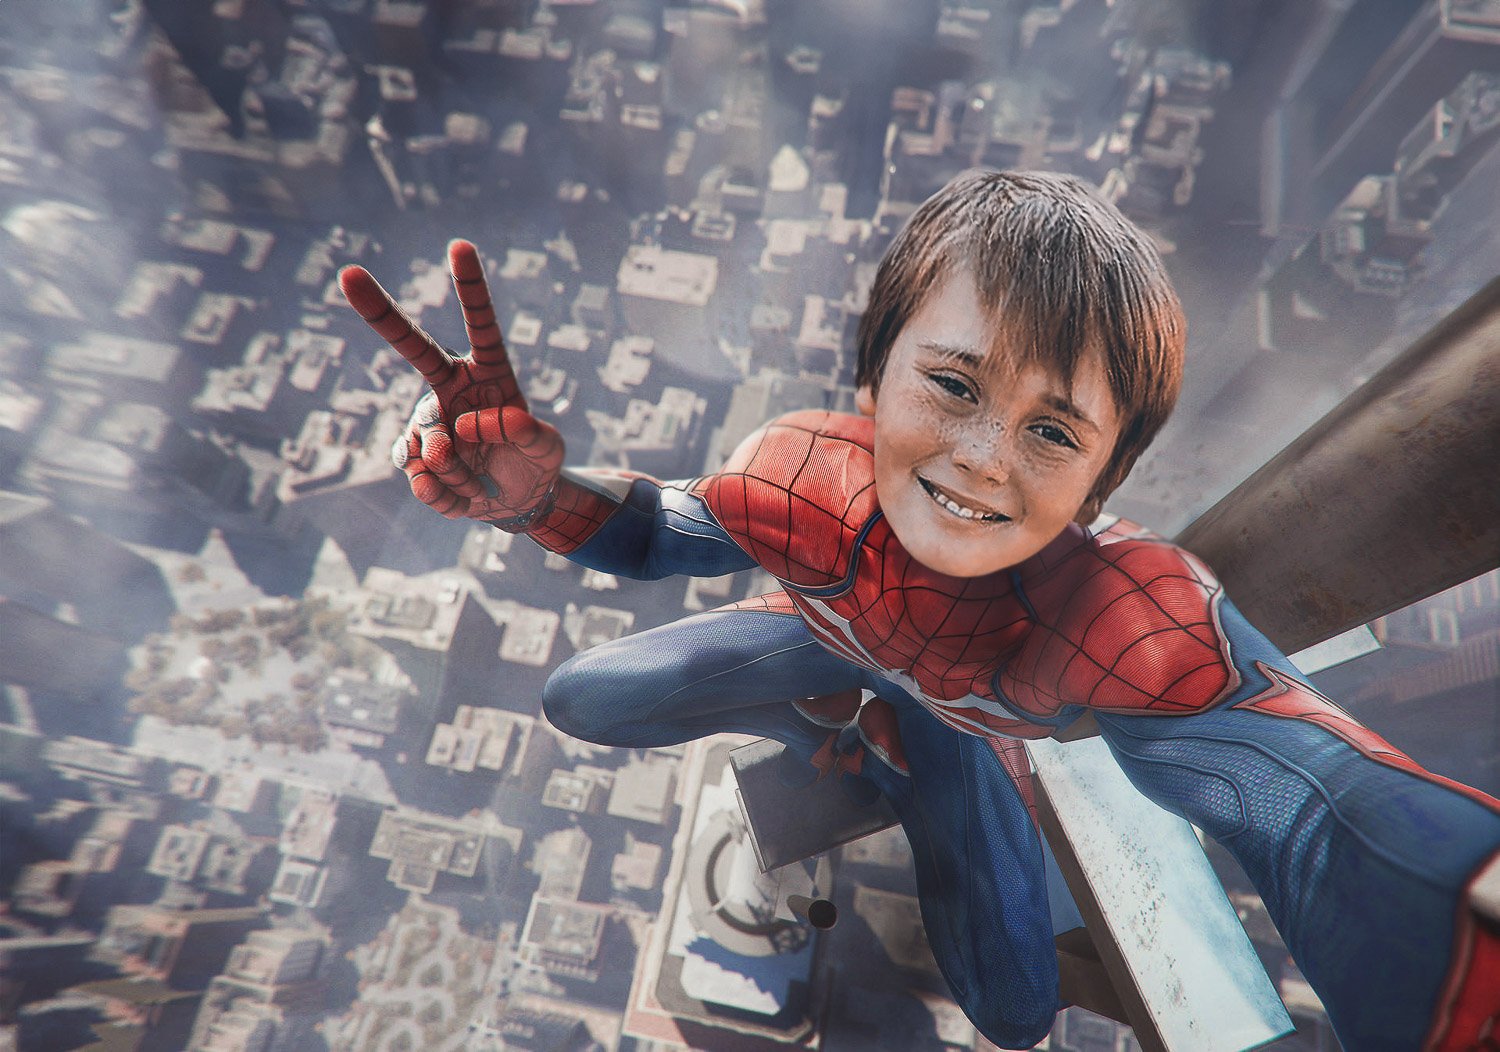 A young boy in a Spiderman costume perched on a tall building